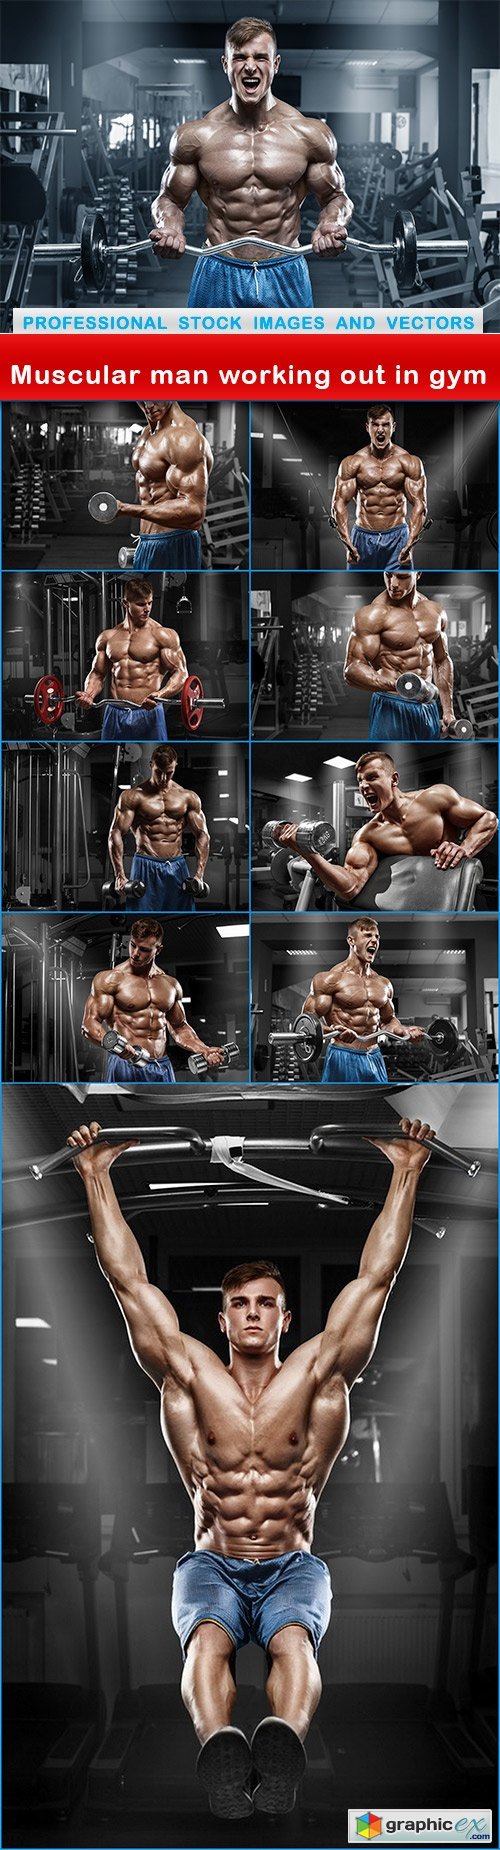 Muscular man working out in gym - 10 UHQ JPEG